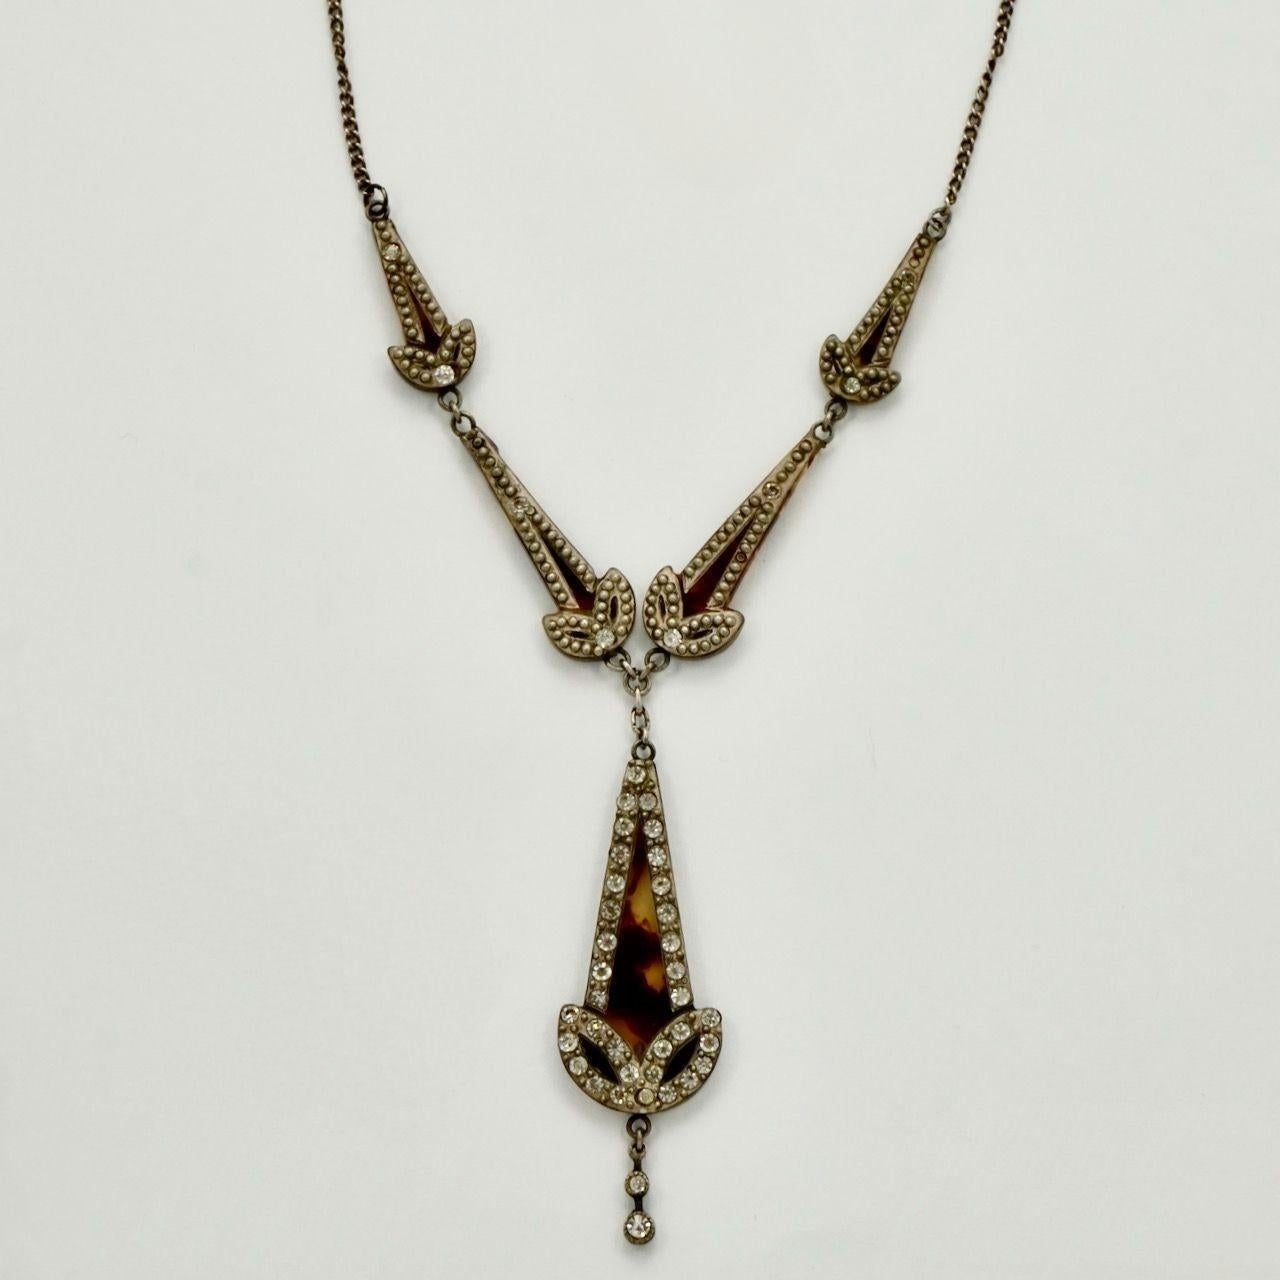 Beautiful Art Deco silver tone and faux tortoiseshell necklace, set with a small dome and rhinestone design (there are three domes missing), and featuring a lovely drop set with rhinestones. Measuring necklace length 47 cm / 18.5 inches, and the